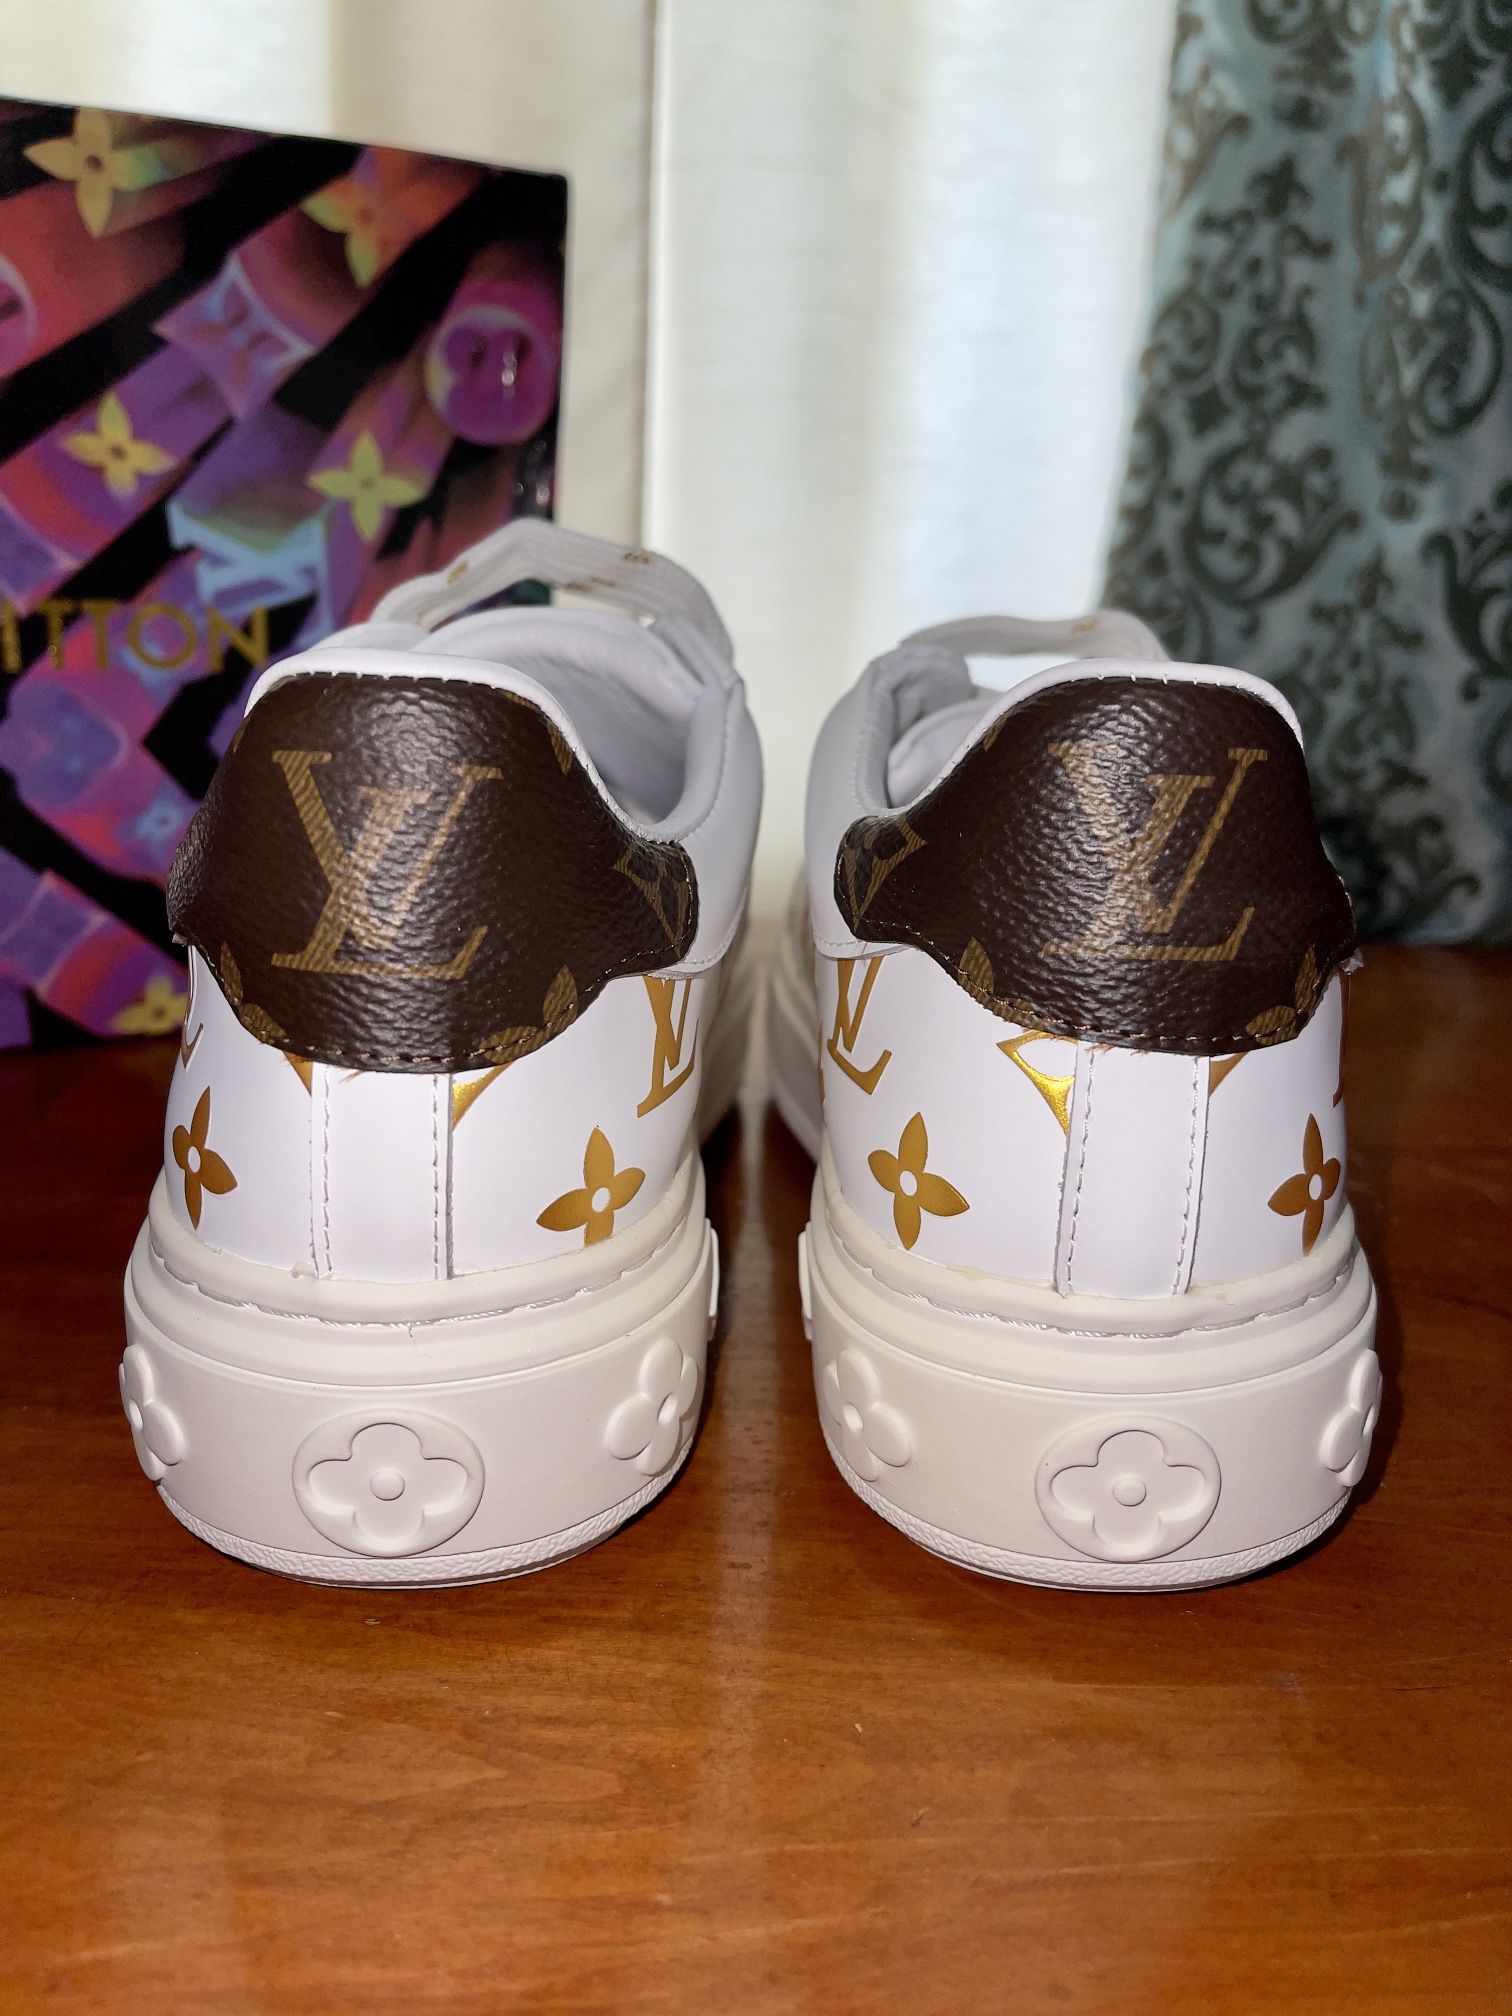 Louis Vuitton vnr sneakers for Sale in Gladwyne, PA - OfferUp